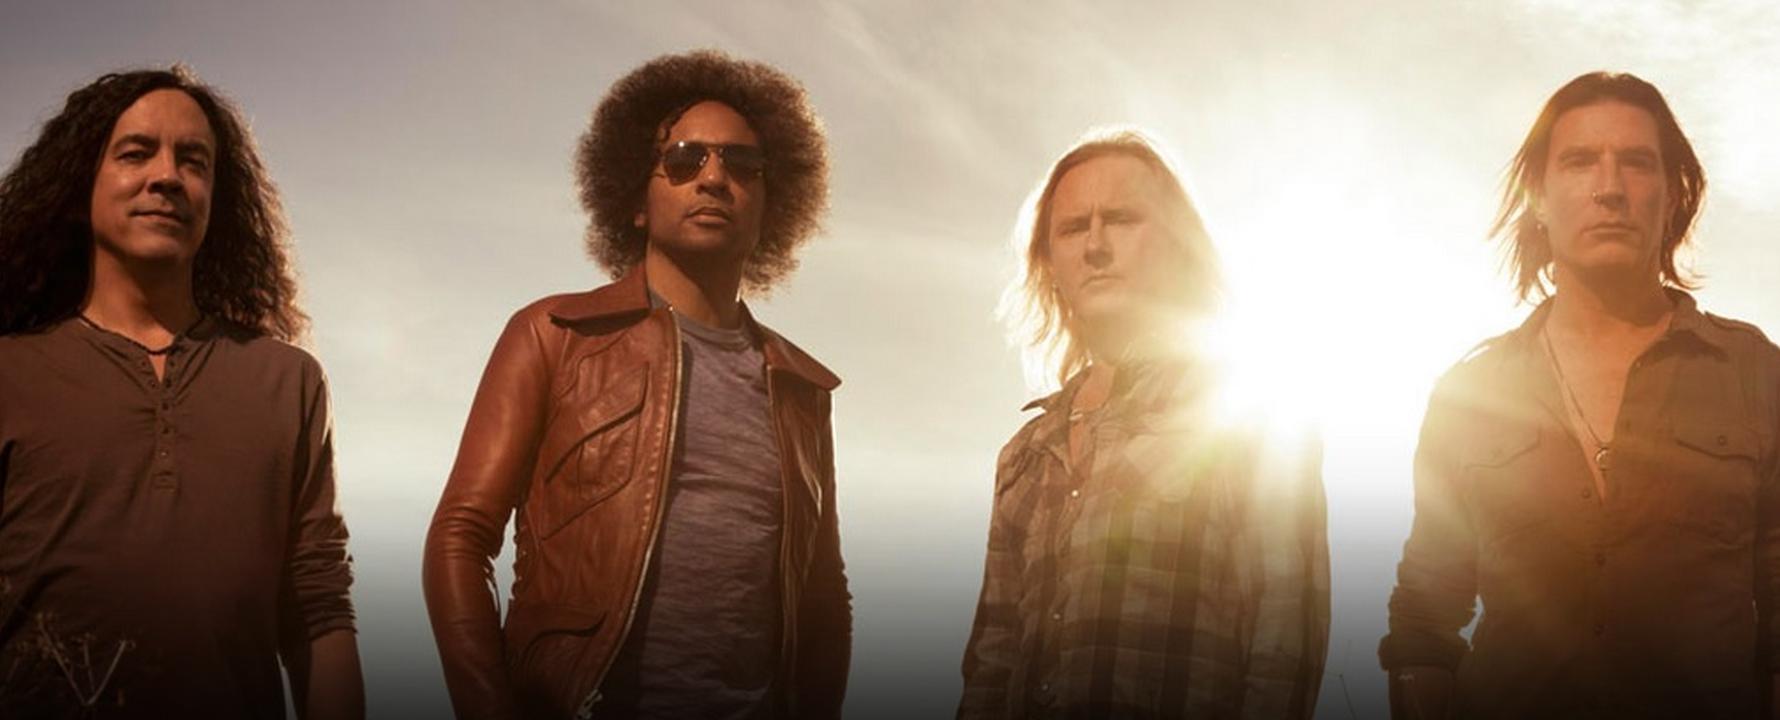 Promotional photograph of Alice in Chains.